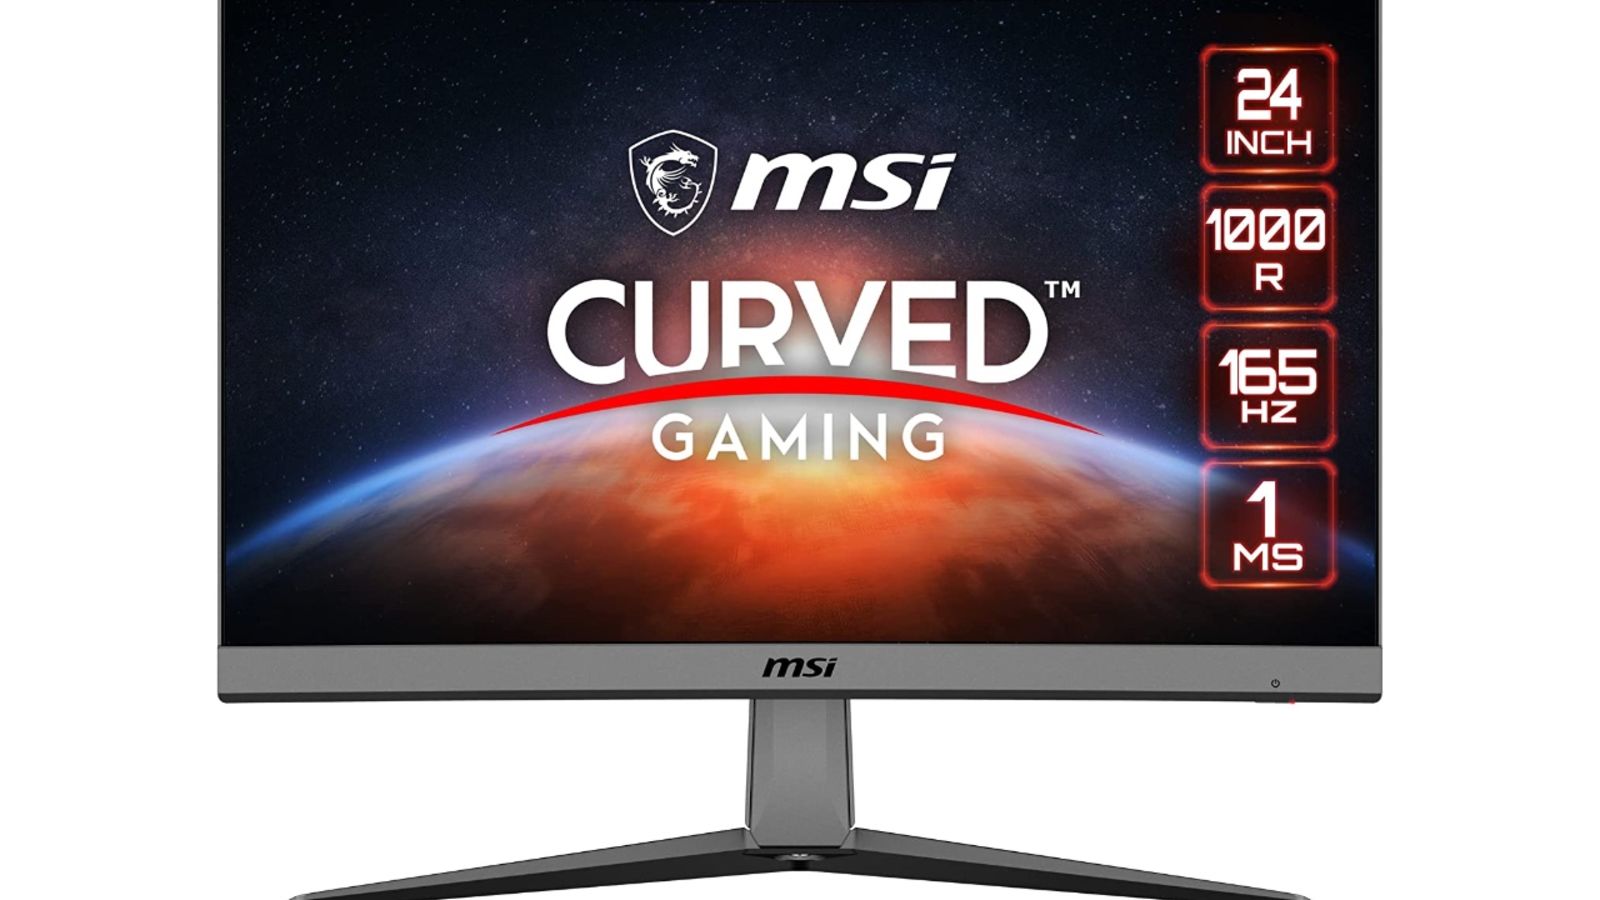 Save a third on this curved gaming monitor from MSI